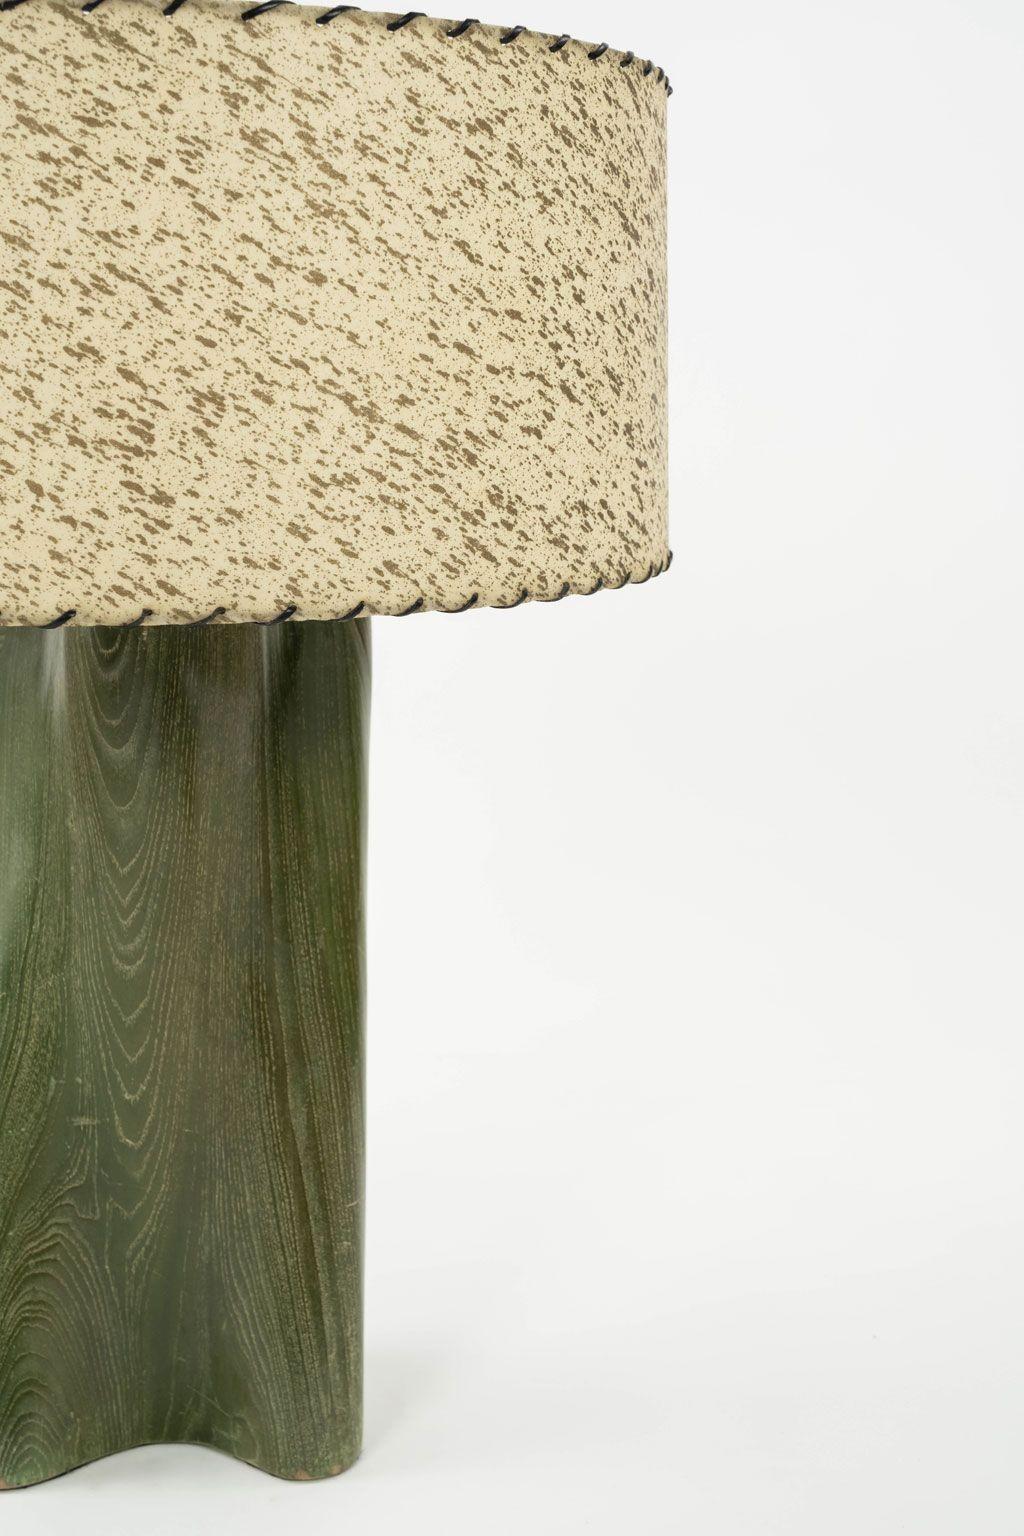 Modern Green-Dyed Carved Wood Table Lamp In Fair Condition For Sale In Houston, TX